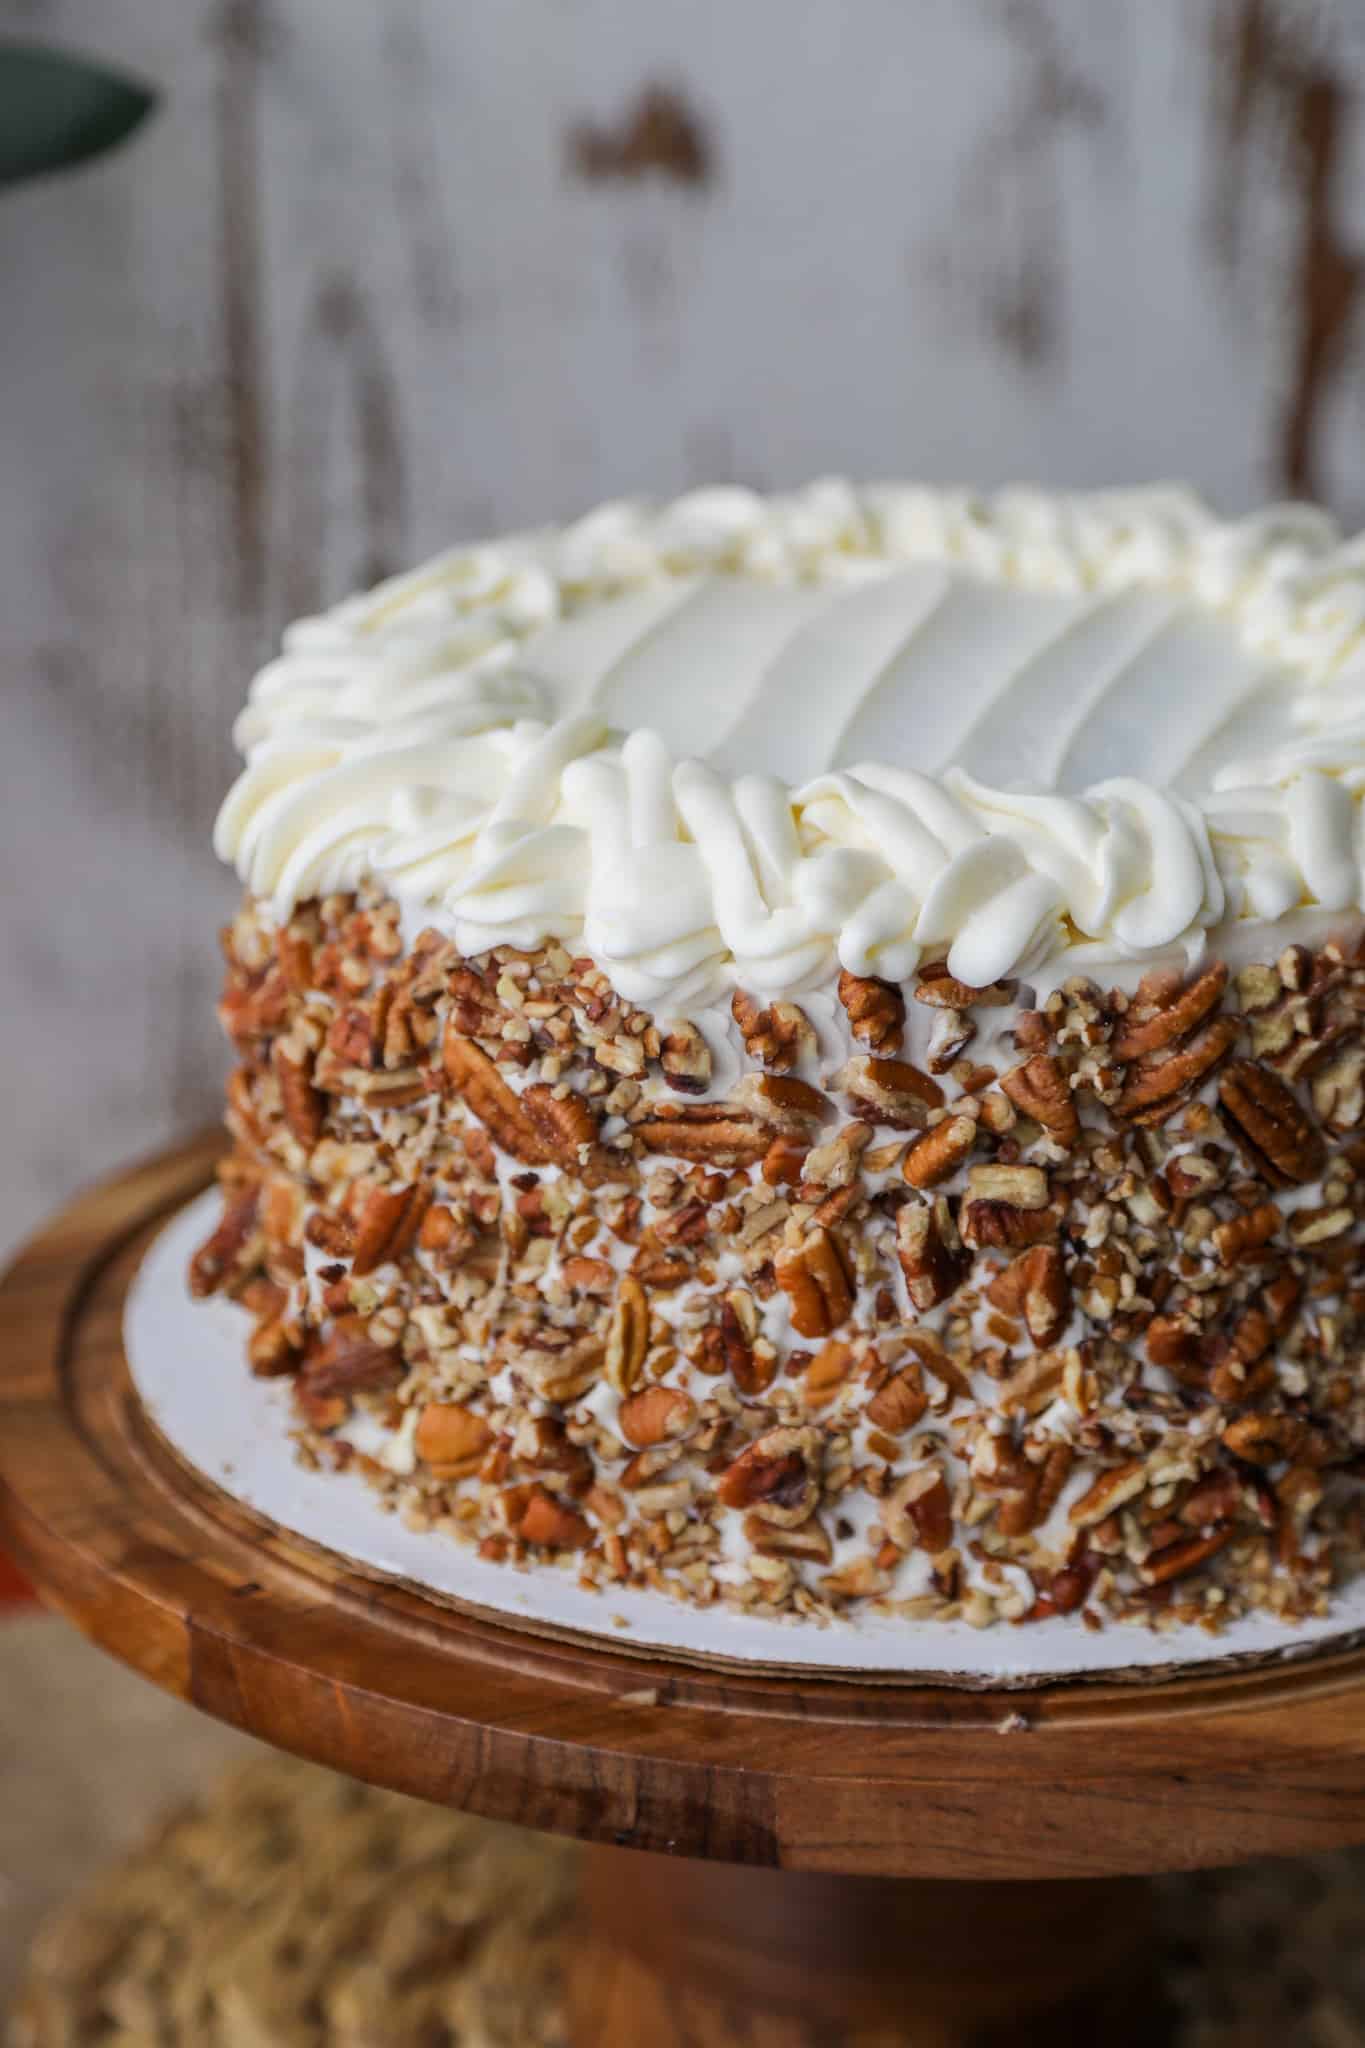 old fashioned carrot cake recipe